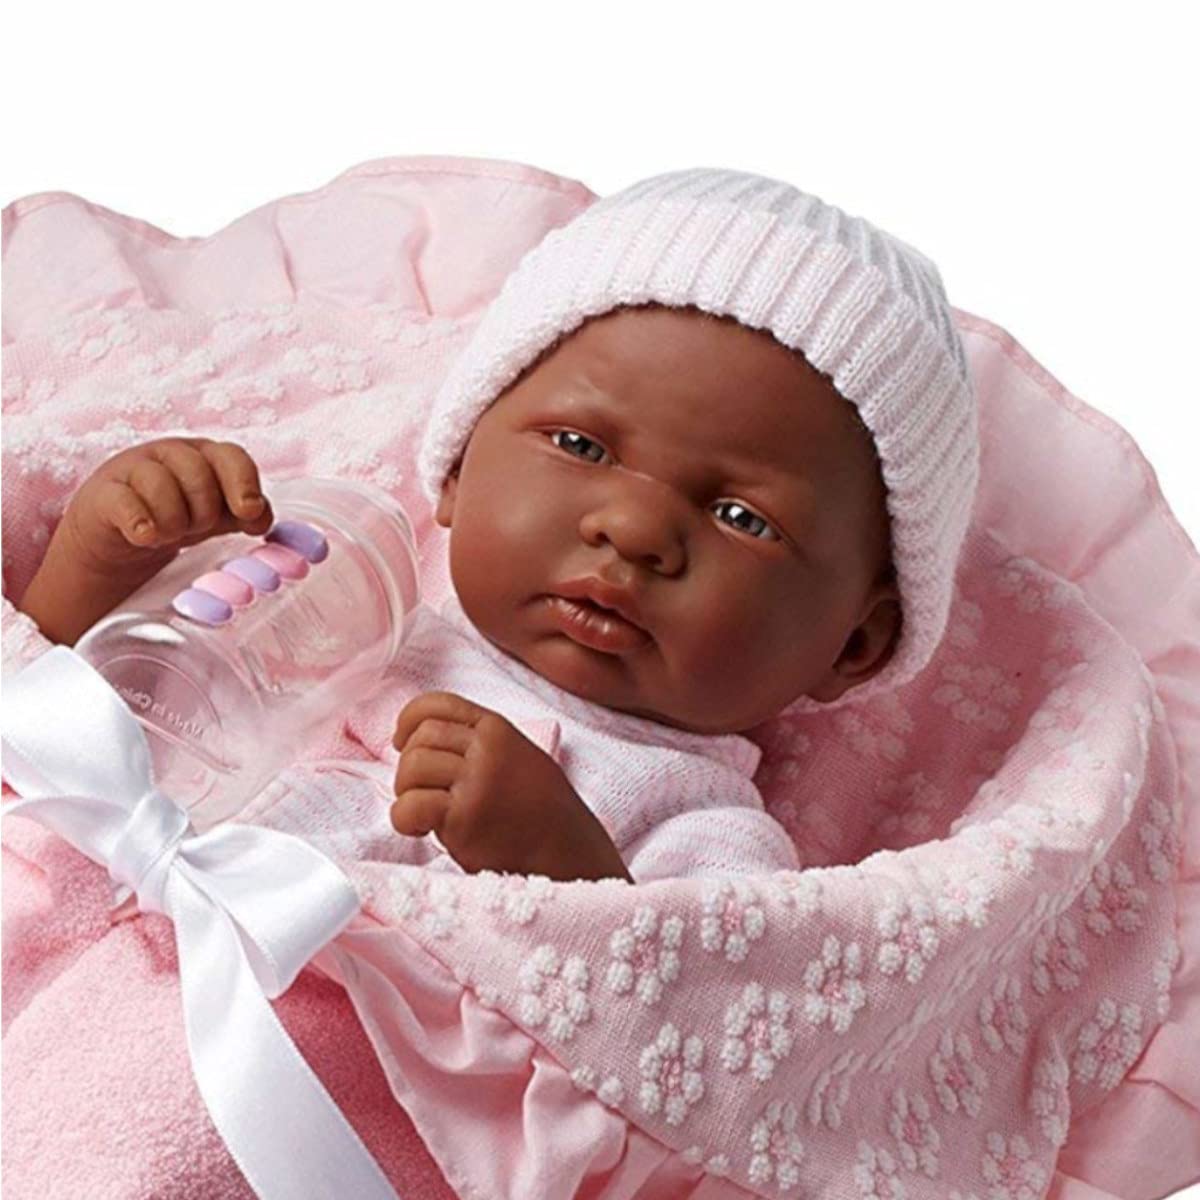 15.5" Deluxe Realistic Baby Doll